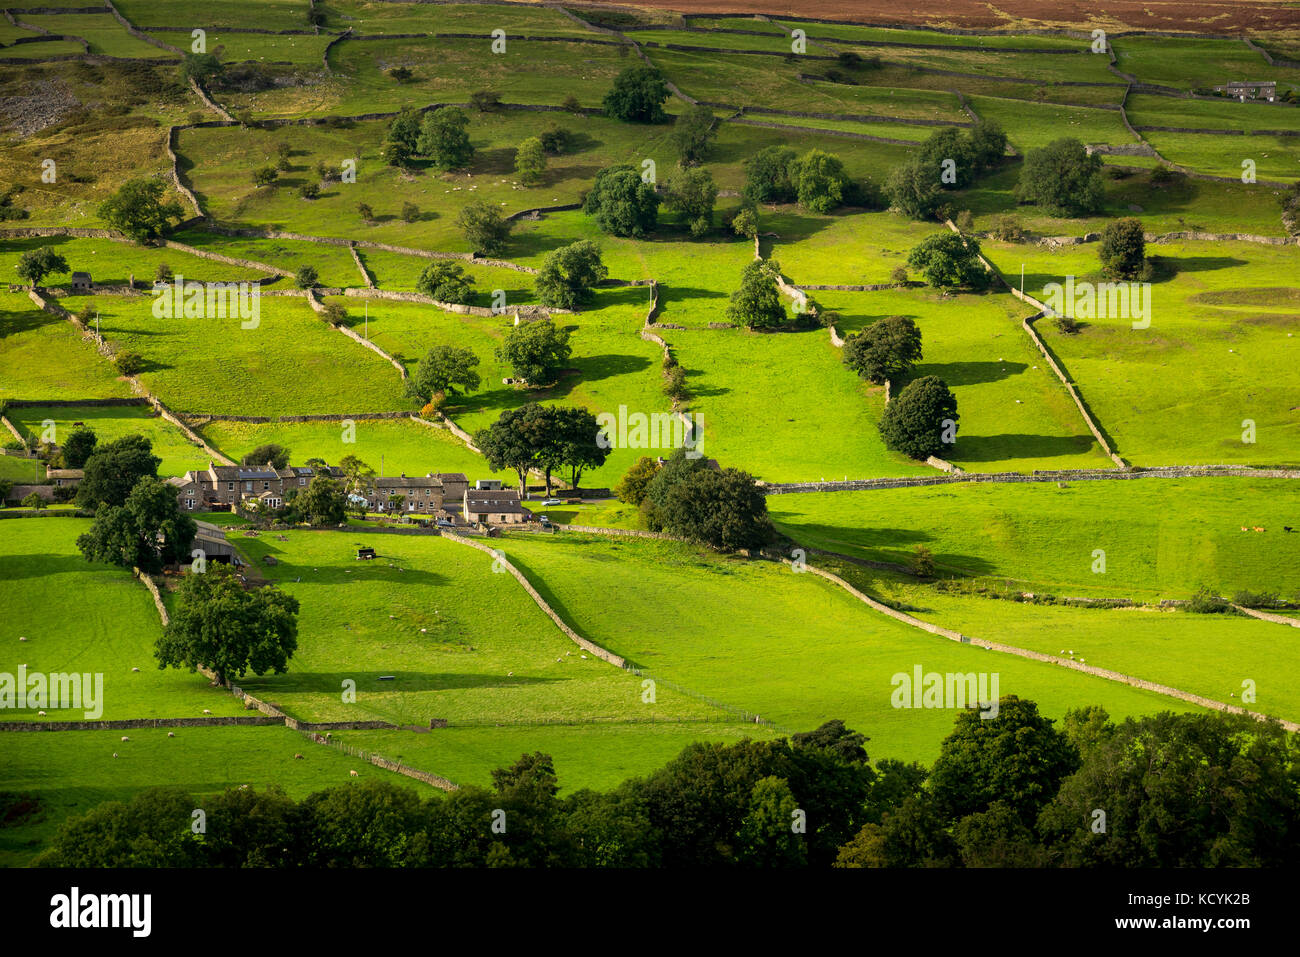 Green fields and drystone walls on a hillside in Swaledale, North Yorkshire, England. Stock Photo